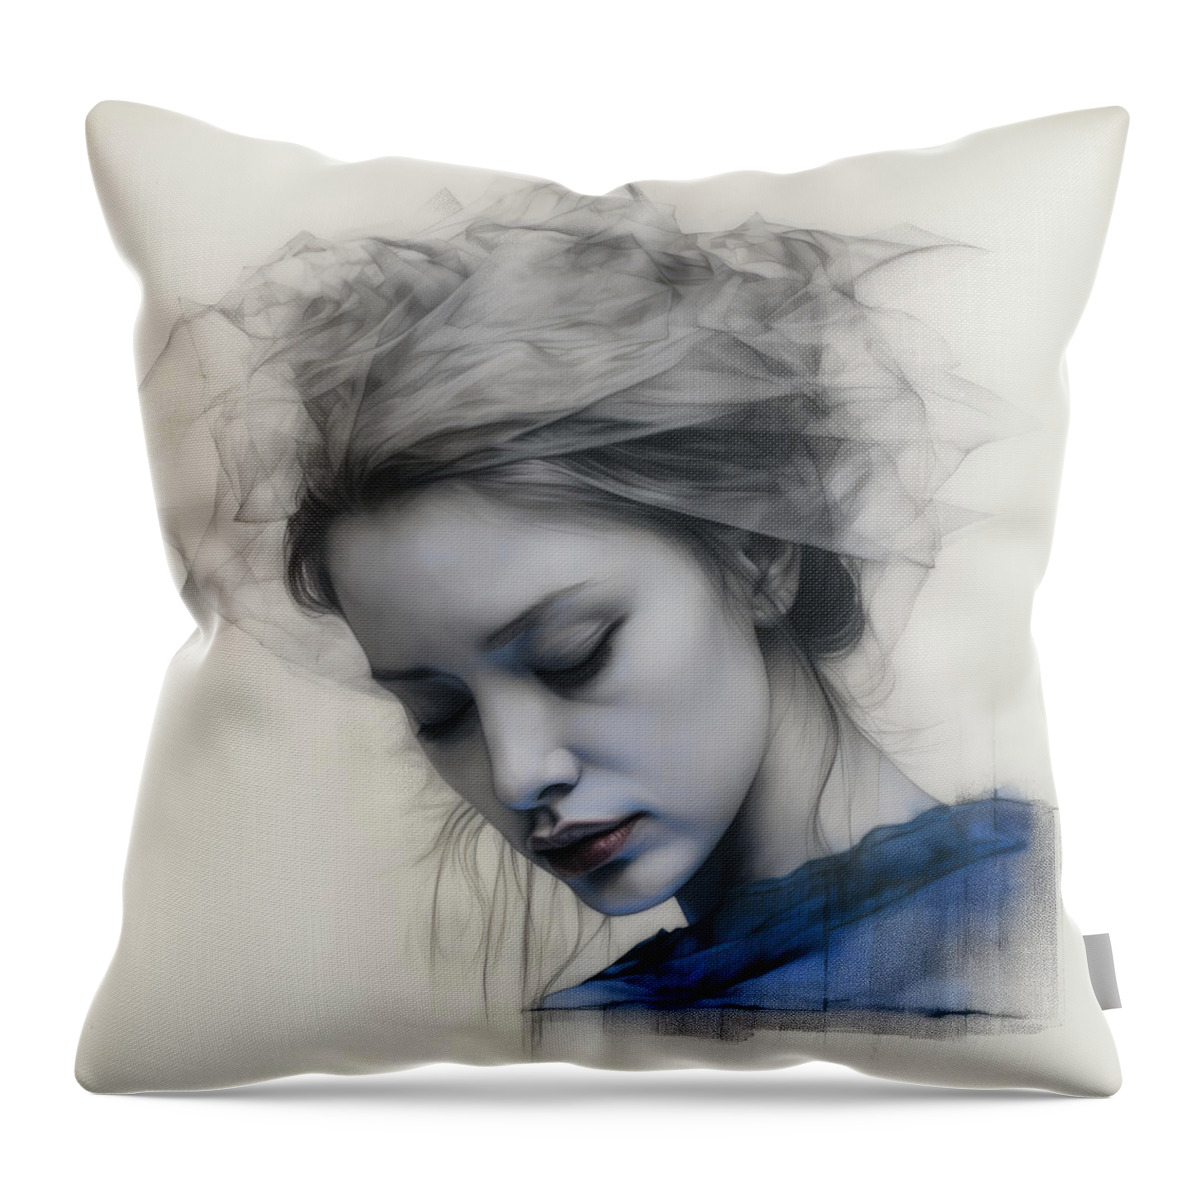 Woman Throw Pillow featuring the drawing Feeling Blue by My Head Cinema